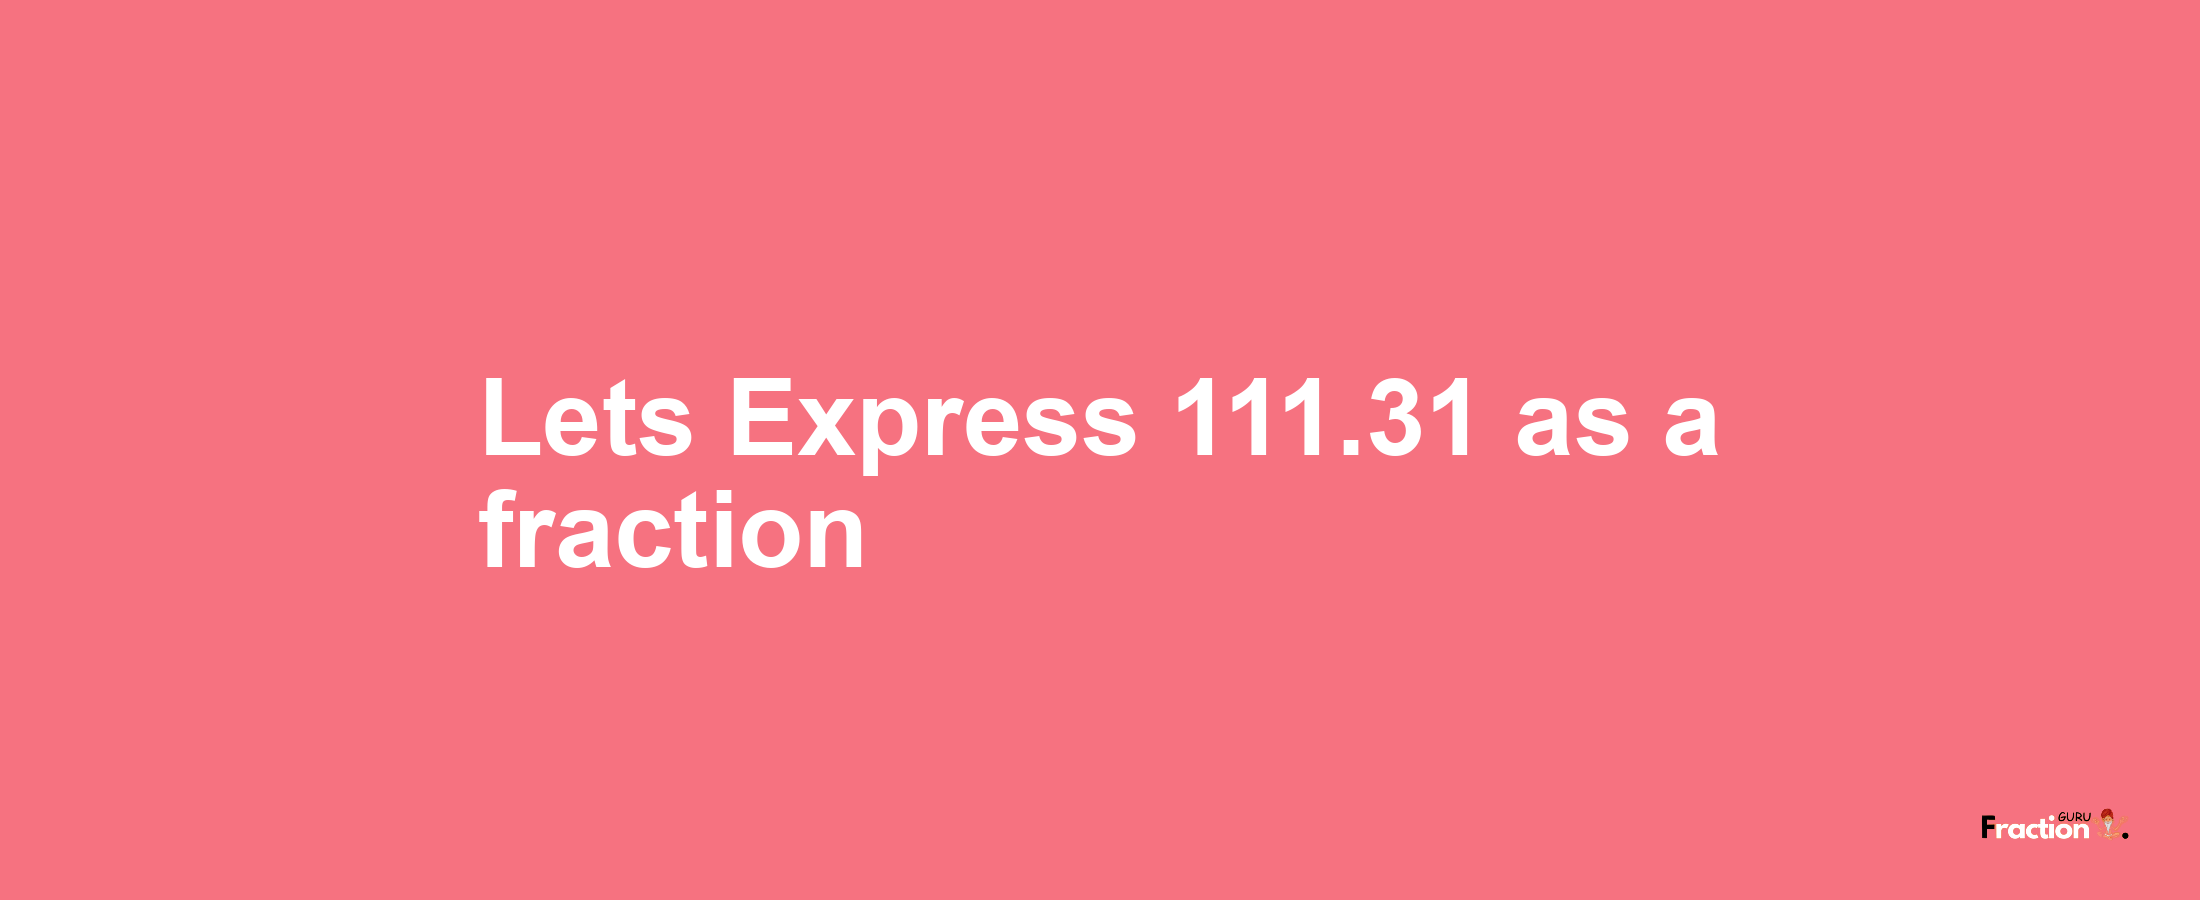 Lets Express 111.31 as afraction